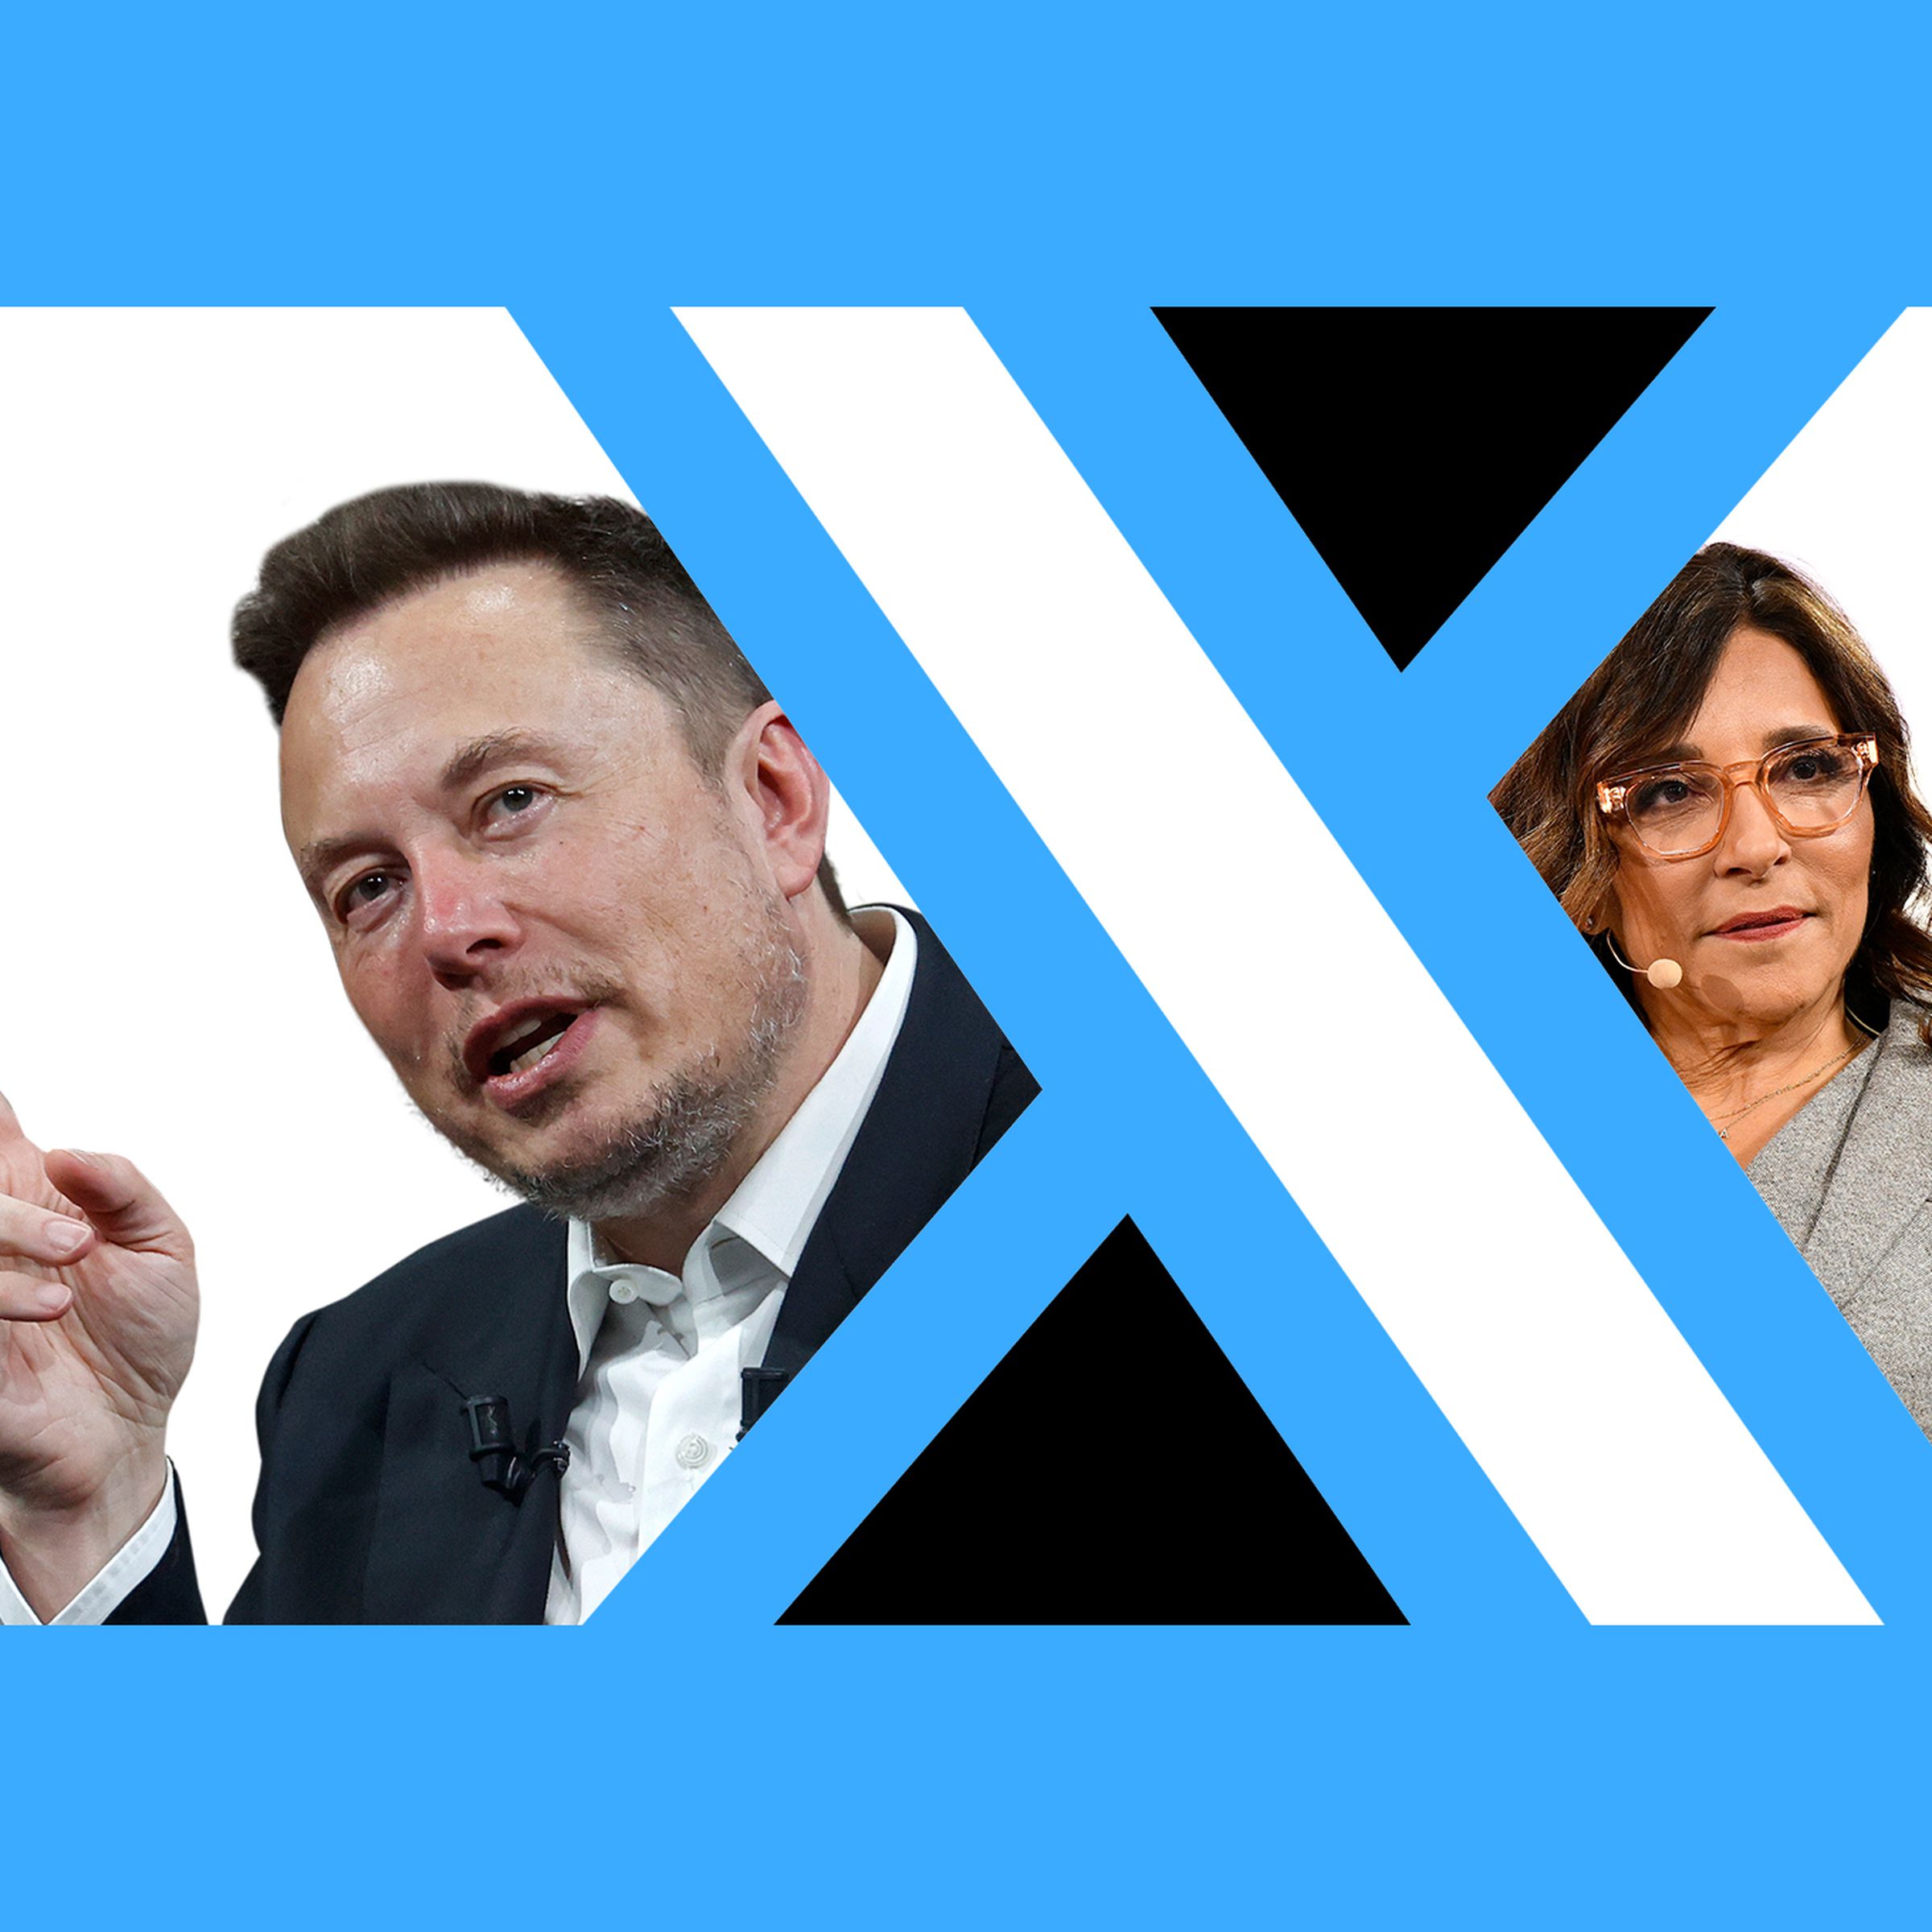 Graphic photo illustration of Elon Musk and Linda Yaccarino in the negative space around the X logo.